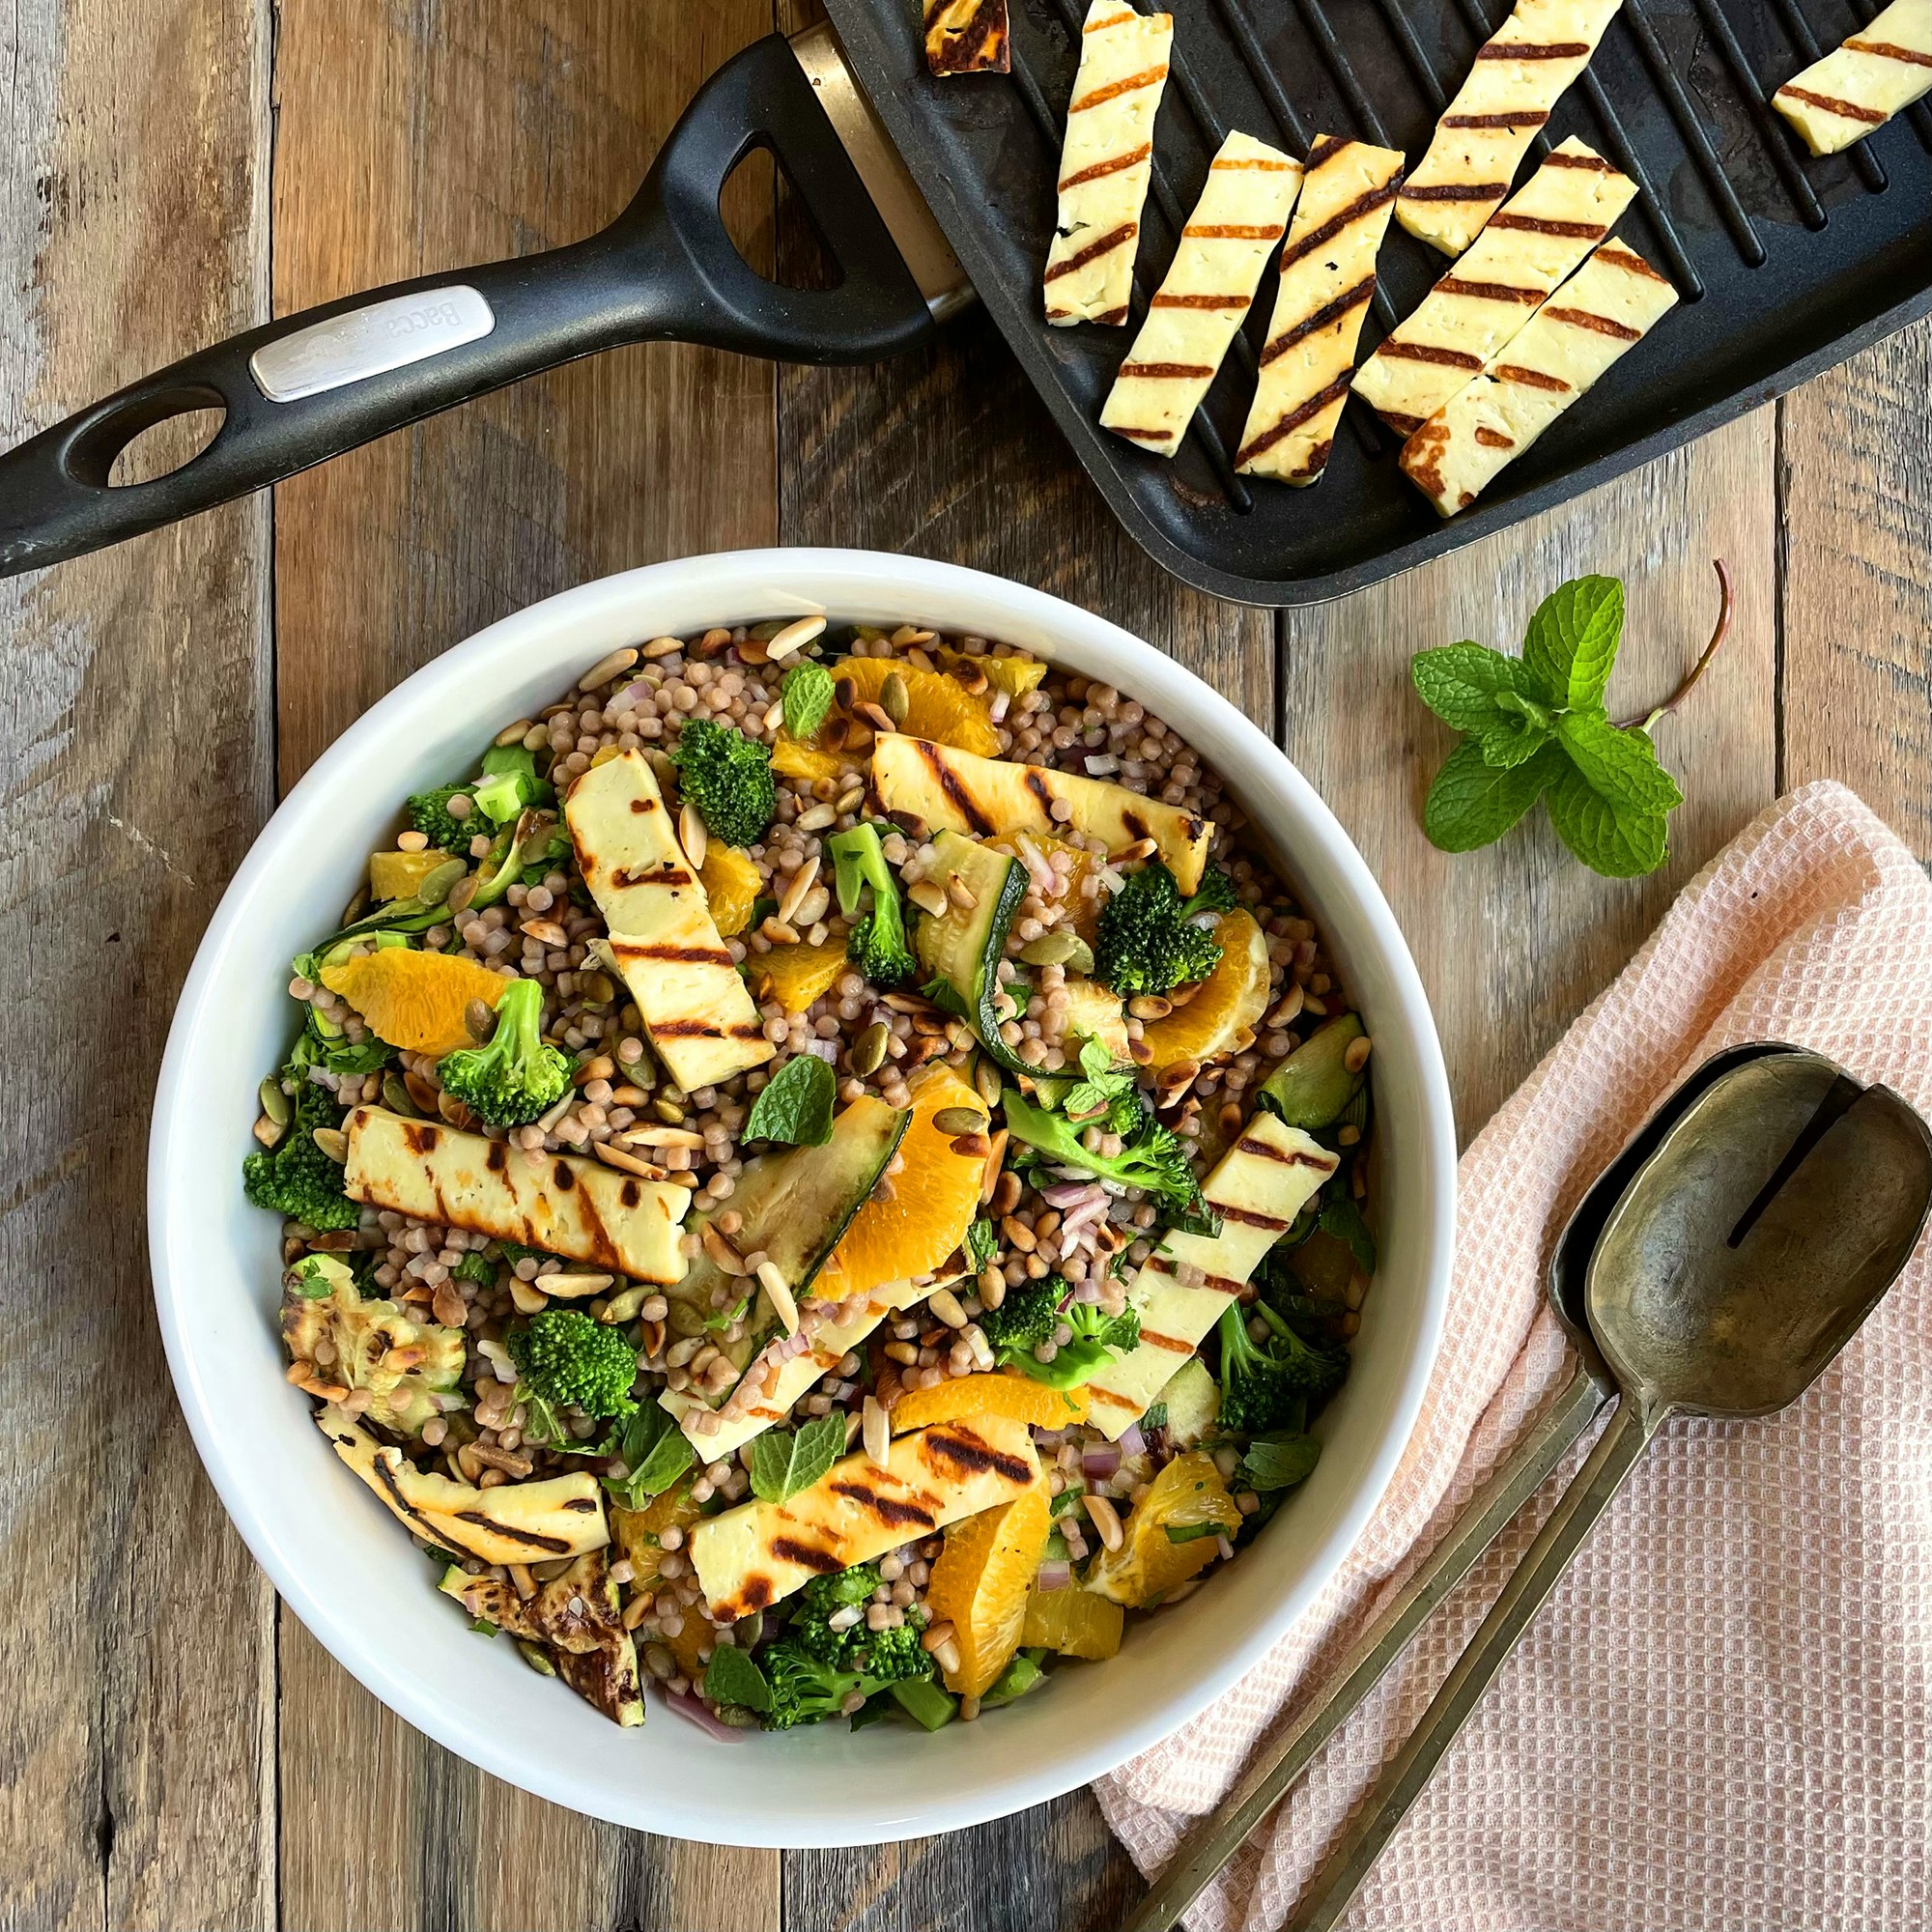 Pearl Cous Cous Salad with Zucchini, Orange, Mint and Halloumi Recipe